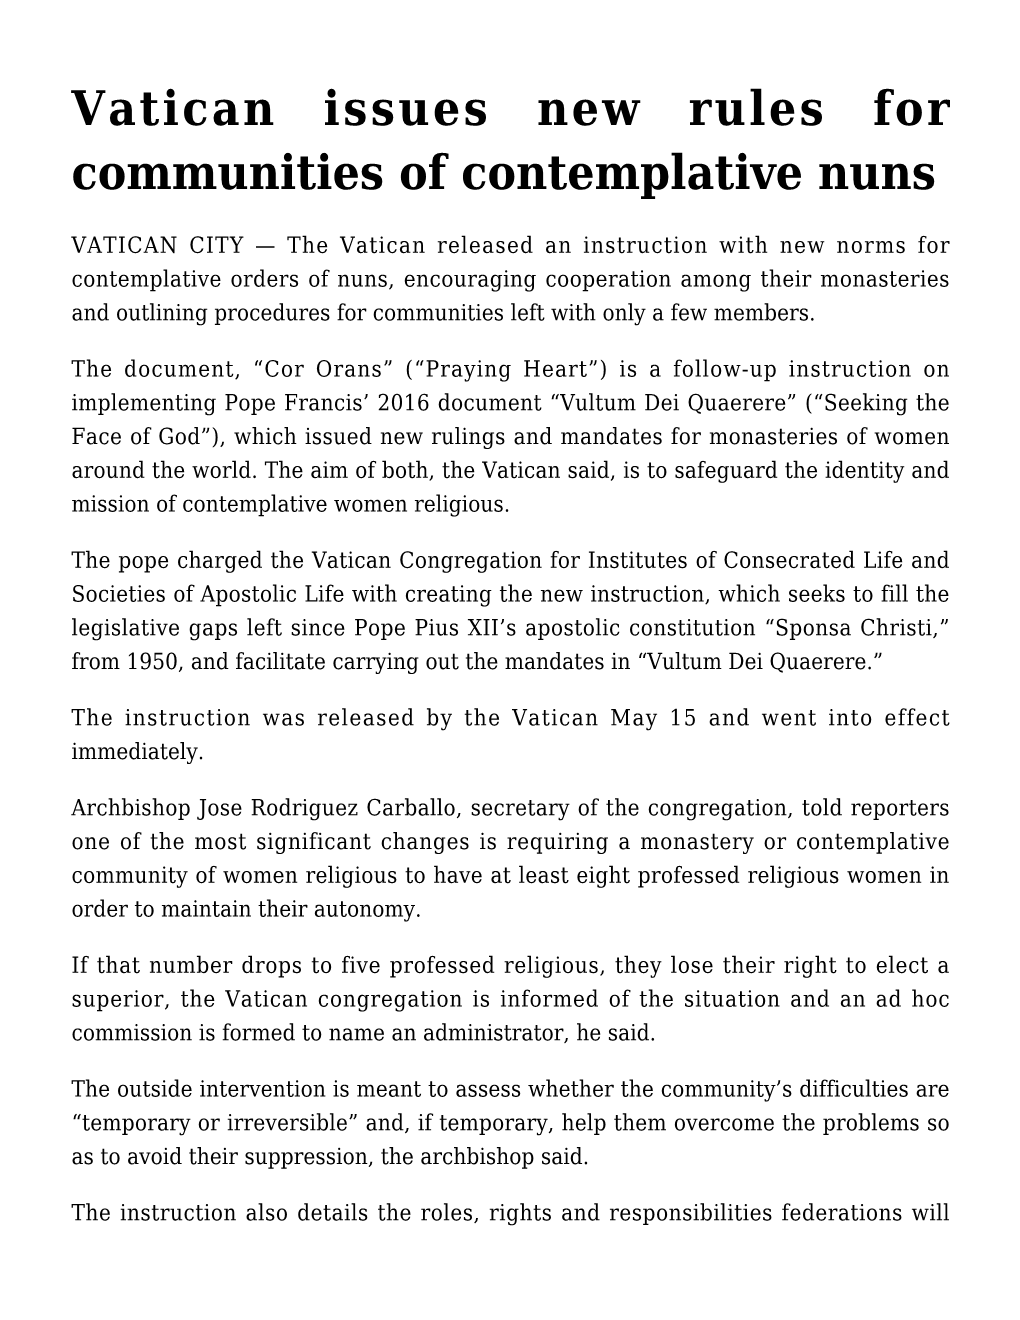 Vatican Issues New Rules for Communities of Contemplative Nuns